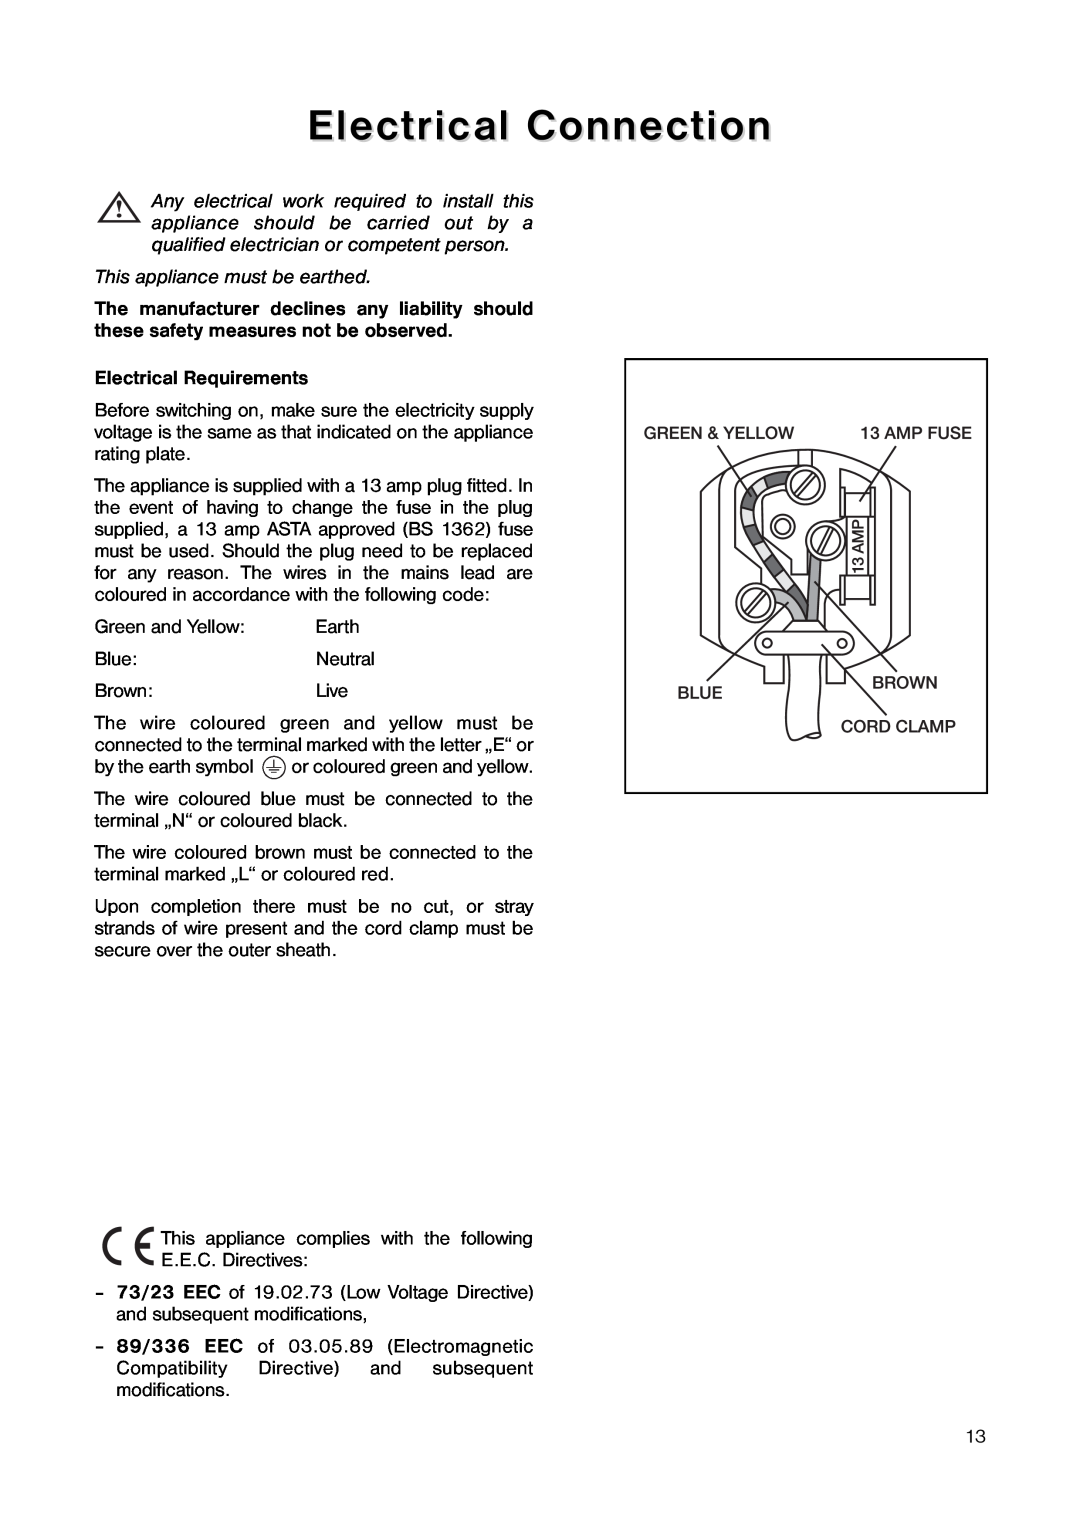 Electrolux EU 5563 C manual Electrical Connection, This appliance must be earthed, Electrical Requirements 